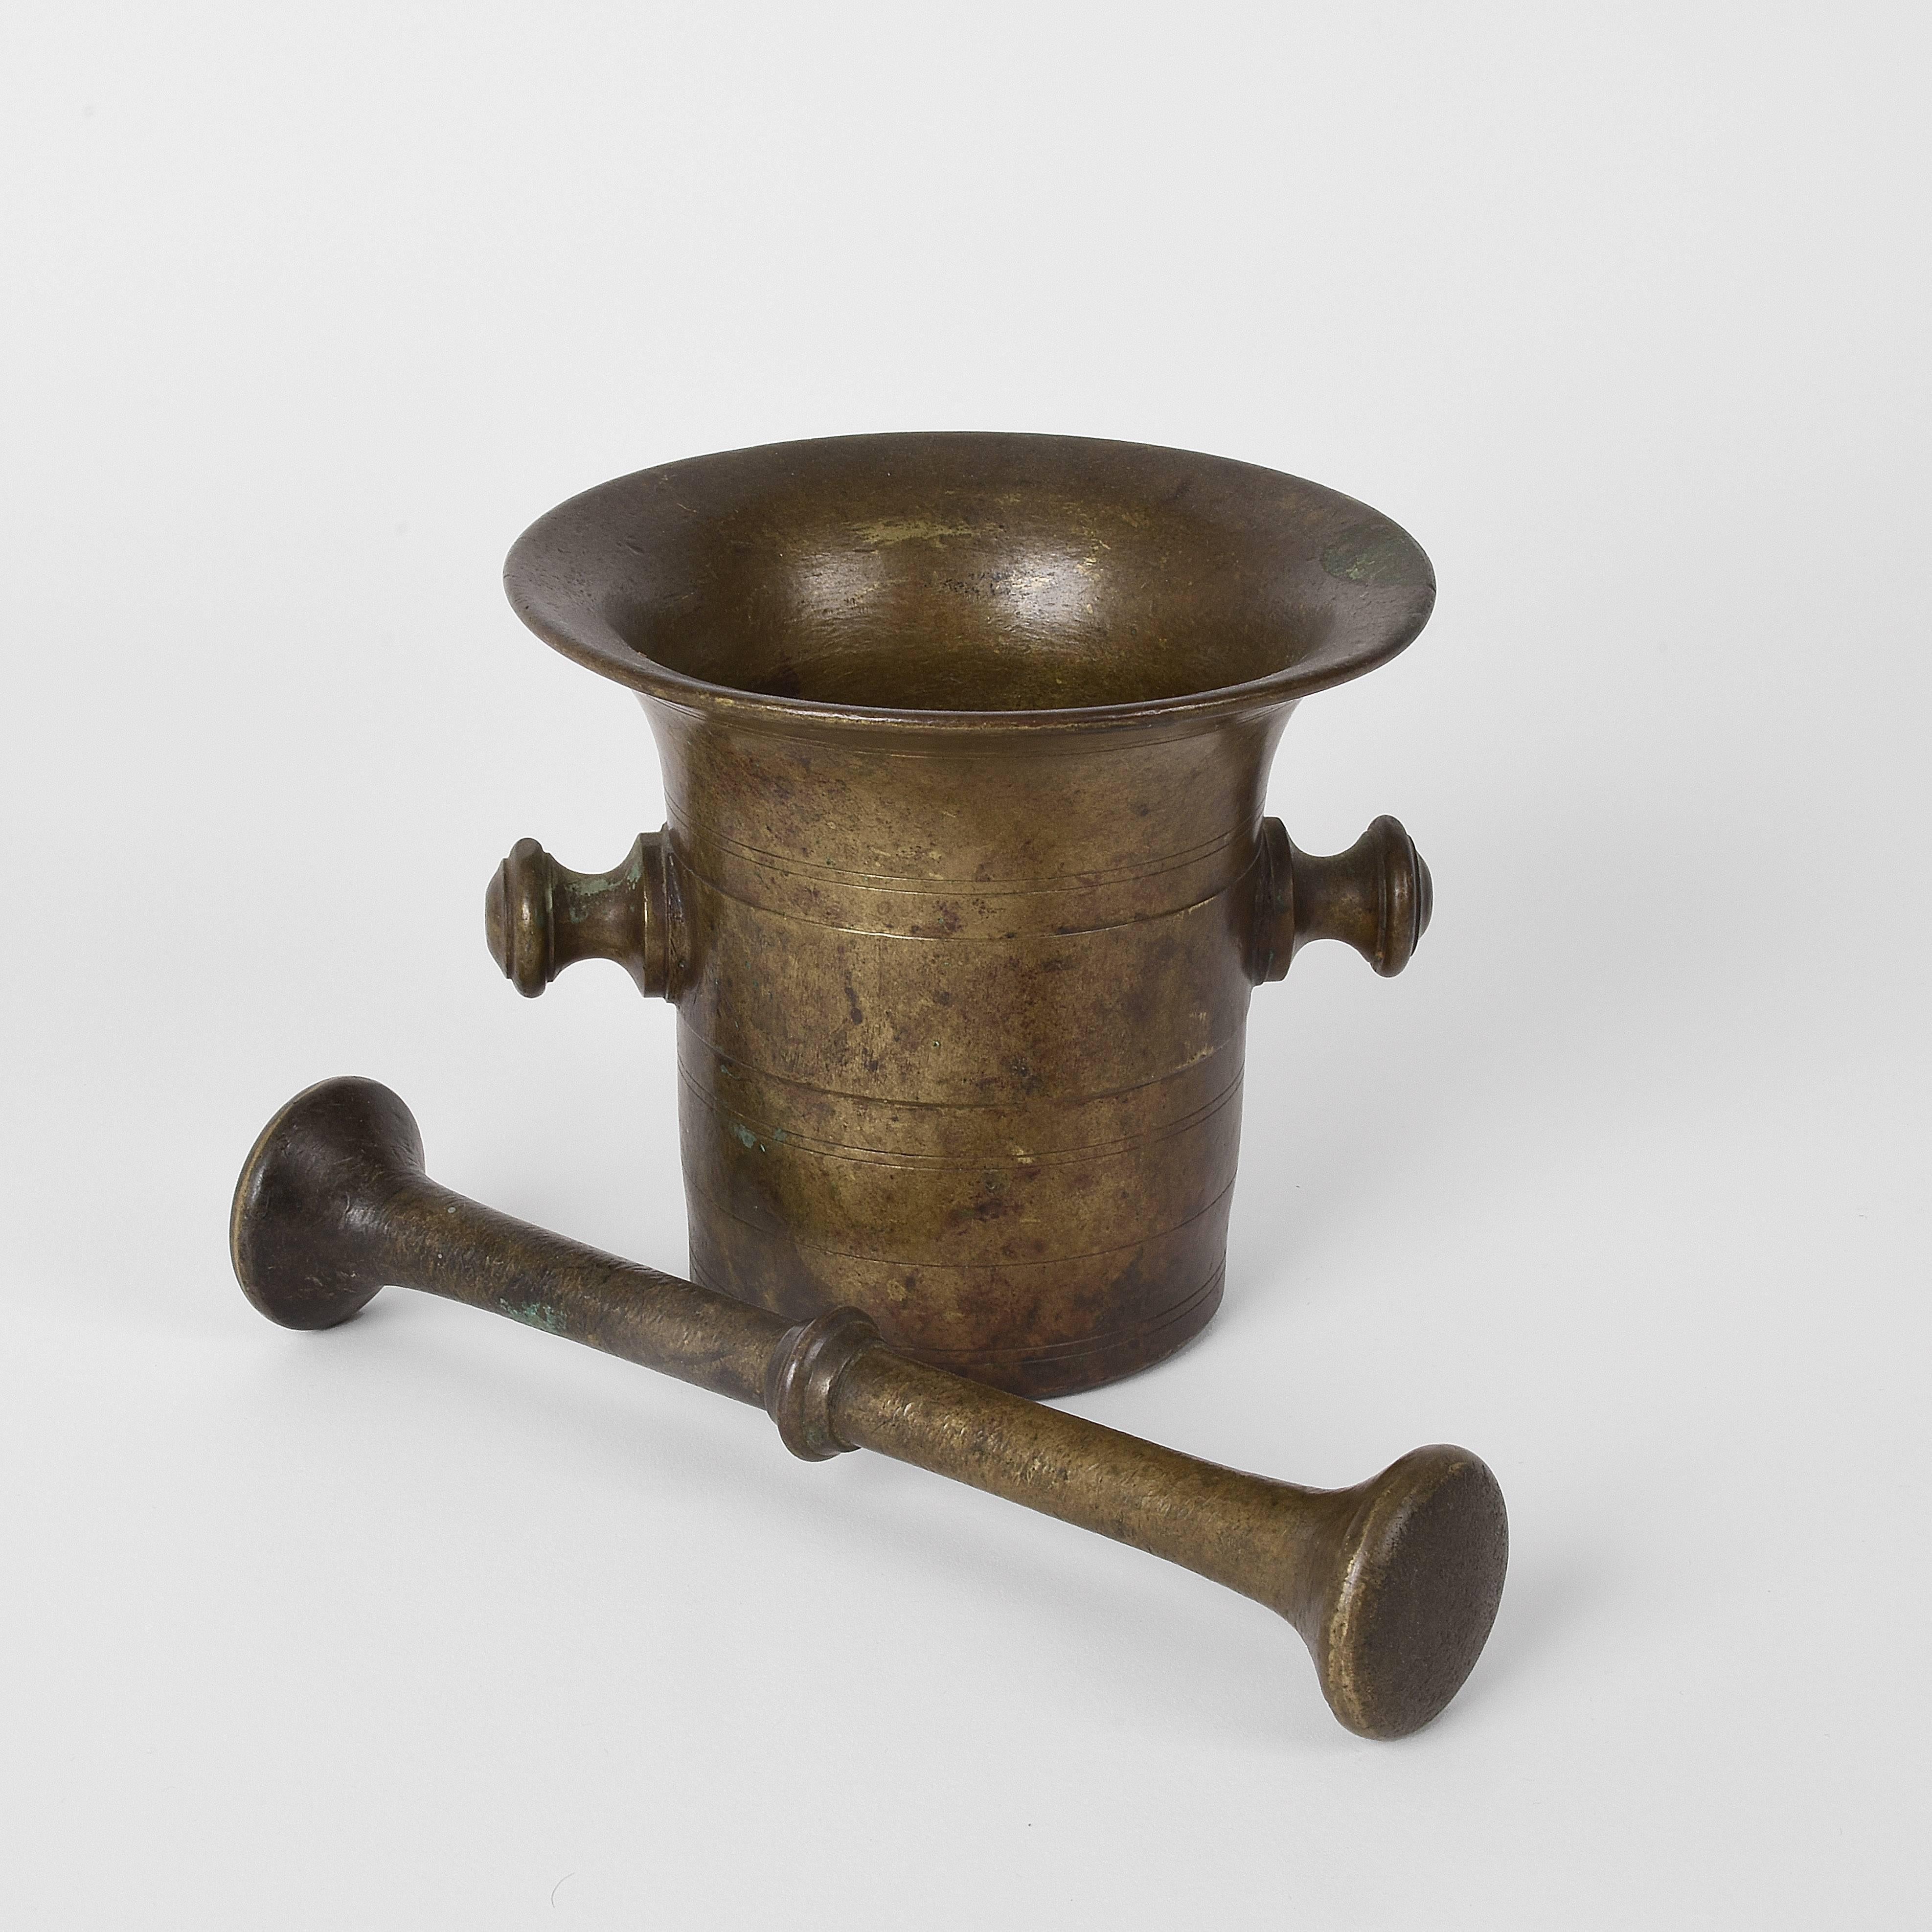 19th-century grand tour antique handmade bronze mortar with pestle. This fantastic piece has an original patina.

The pestle is 9.05 inc high with the mortar with a deep and sleek design.

A great way to decorate a kitchen with a historical